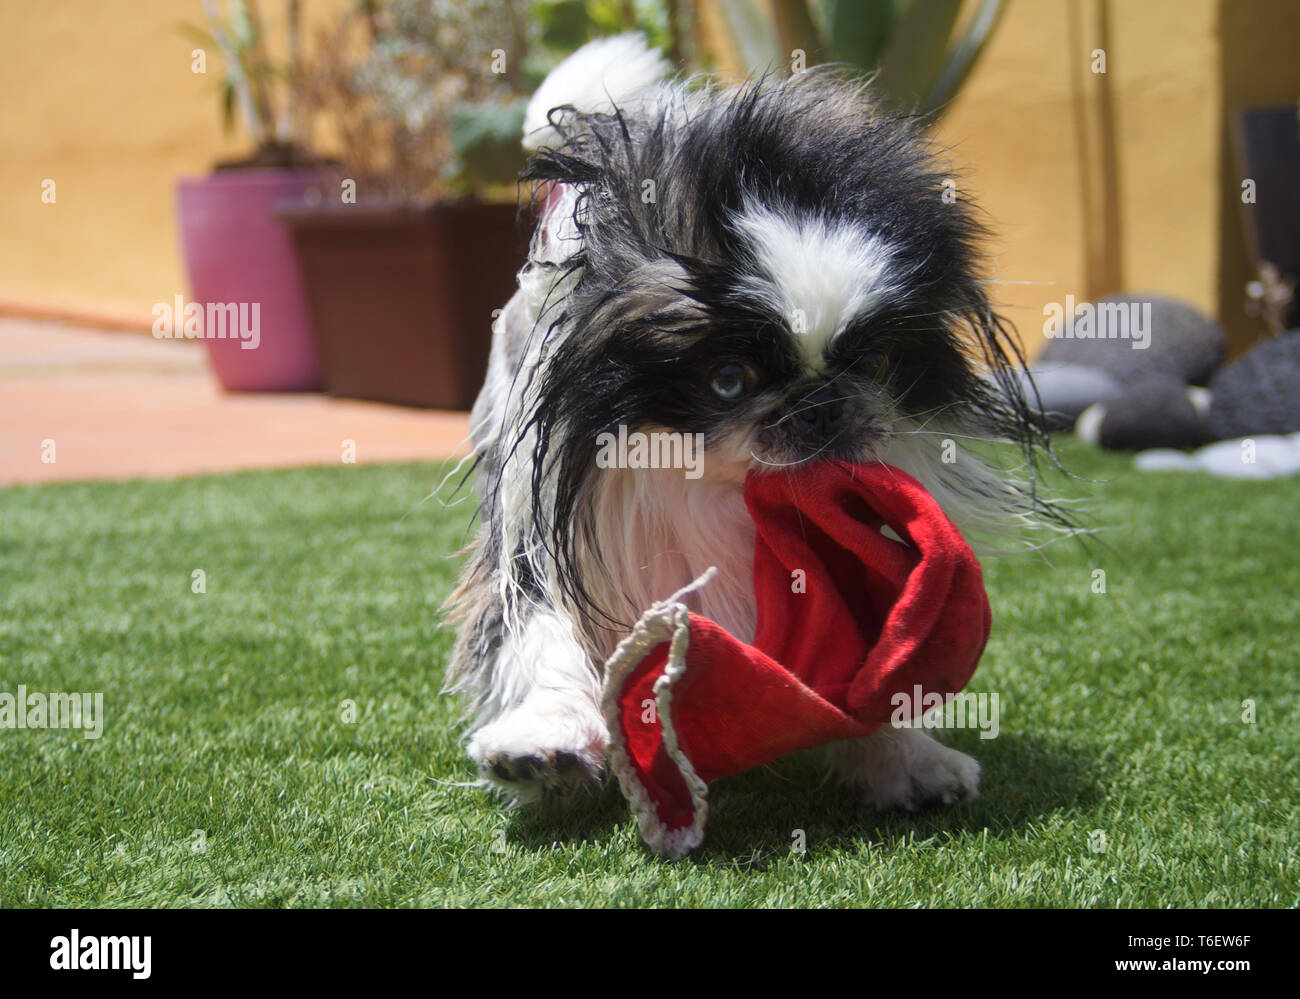 beautiful pekingese dog playing with a red sock Stock Photo